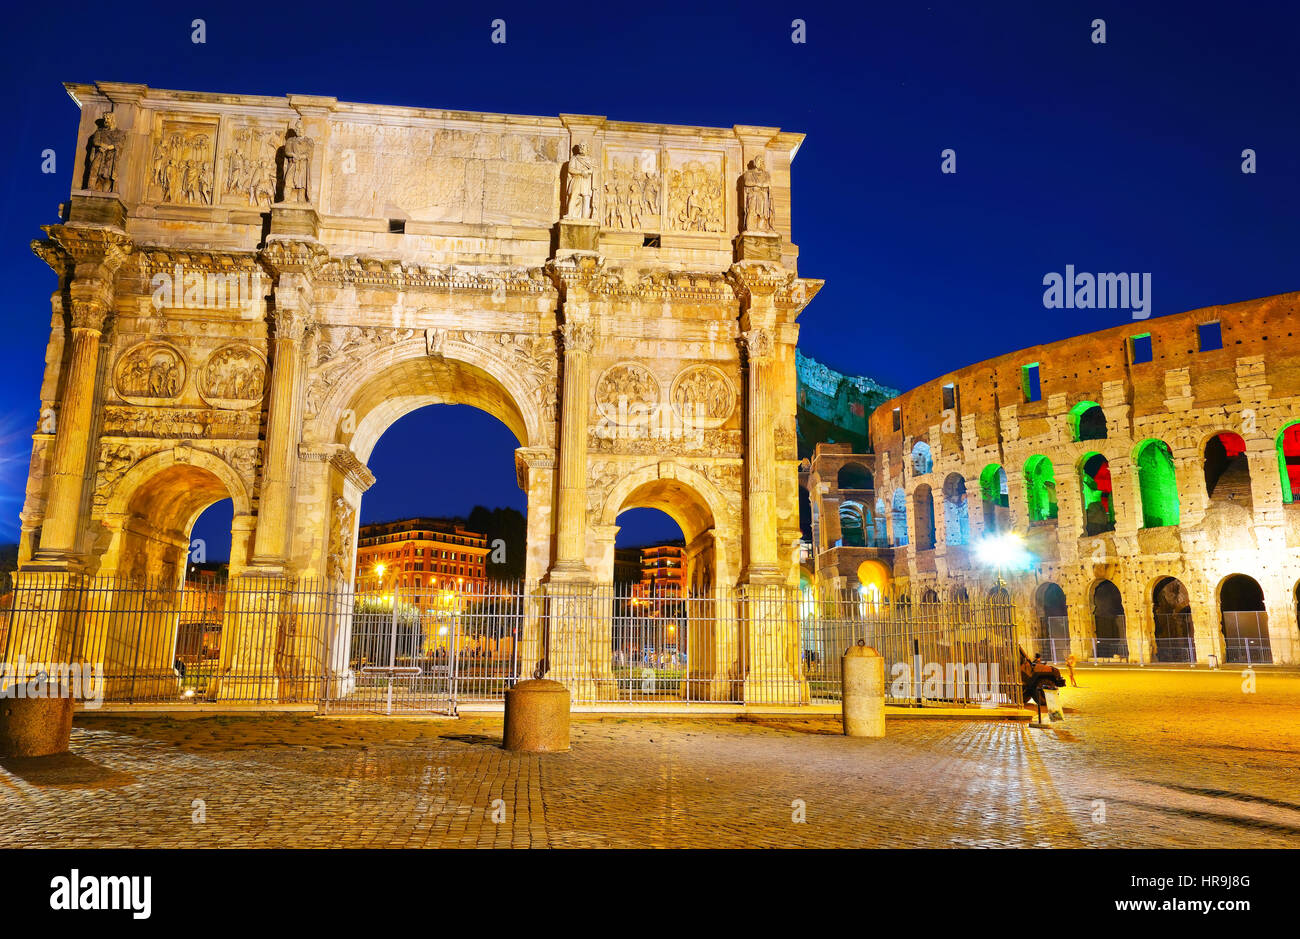 View of the Arch of Constantine and Colosseum at night in Rome, Italy Stock Photo